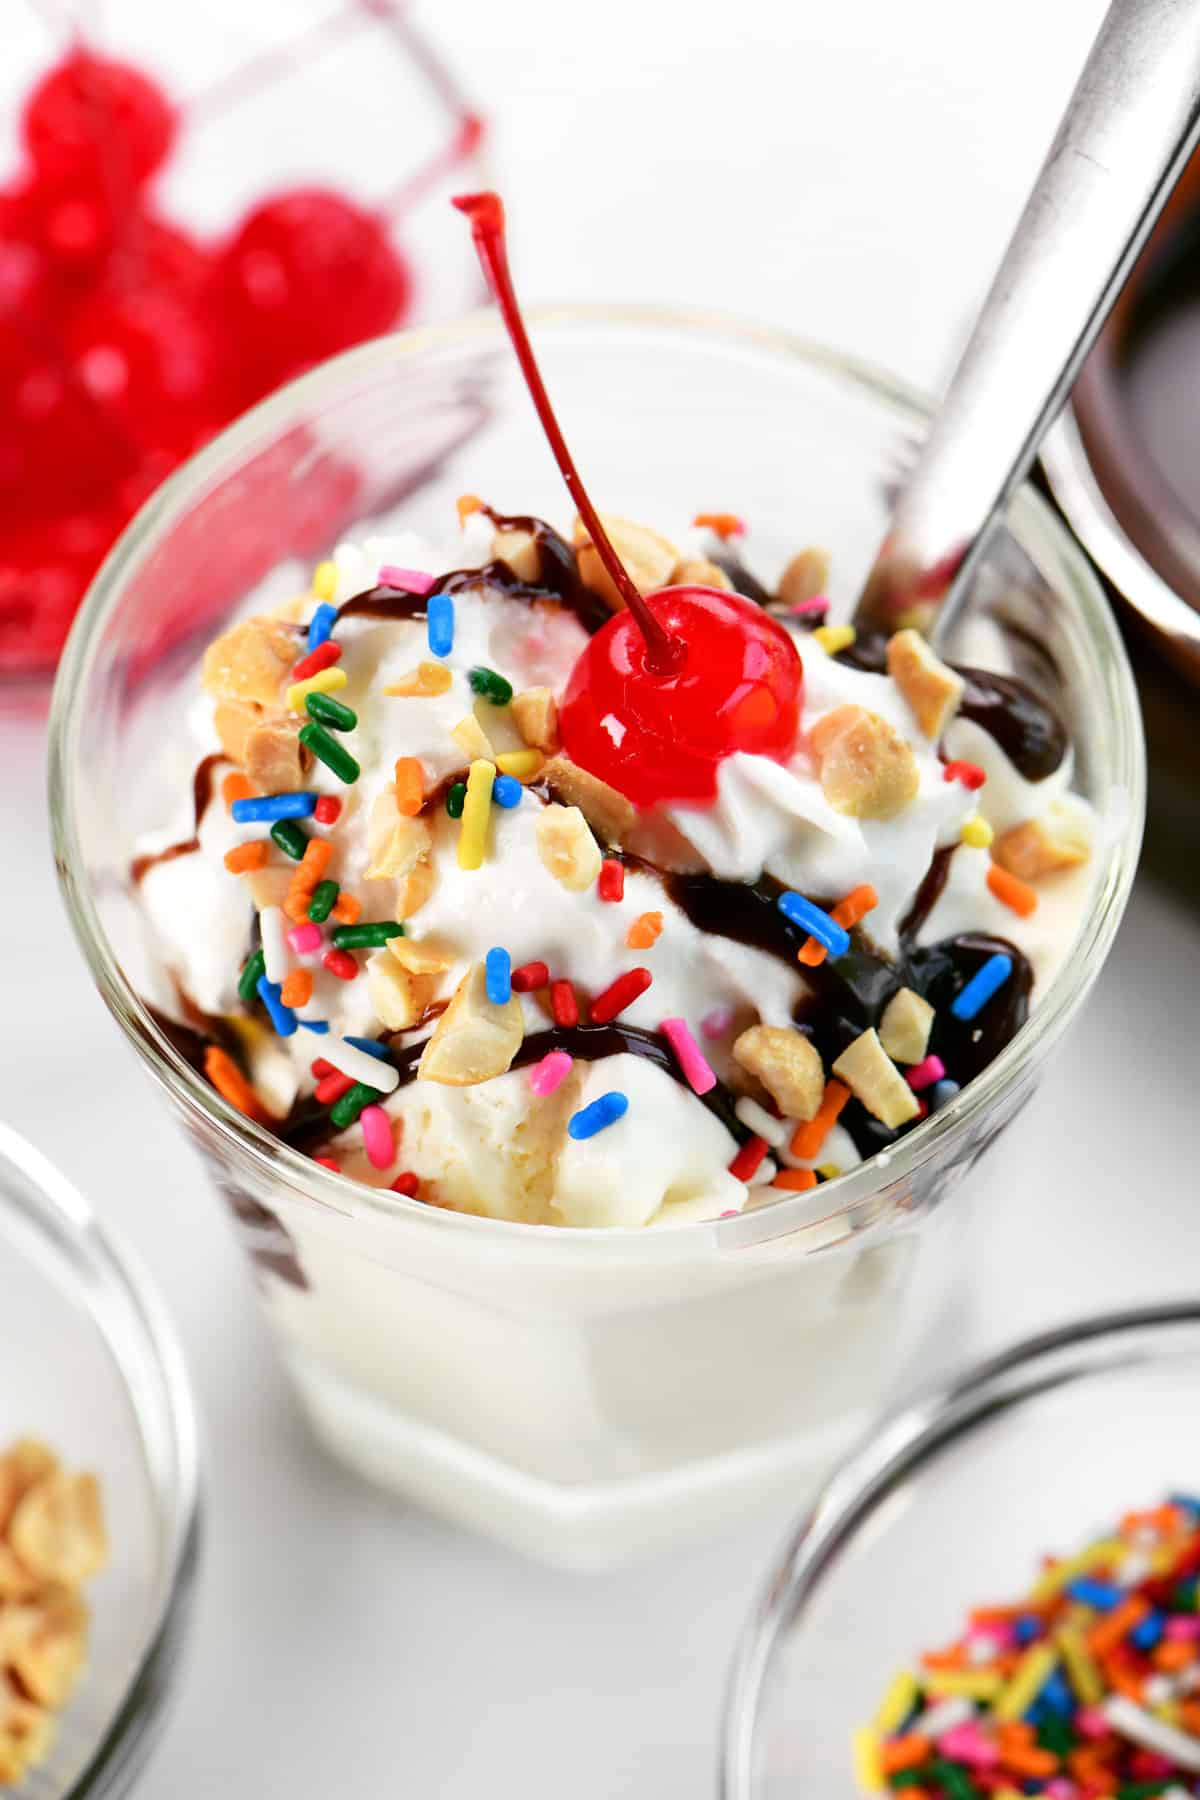 Three ingredient ice cream in a dish with toppings.